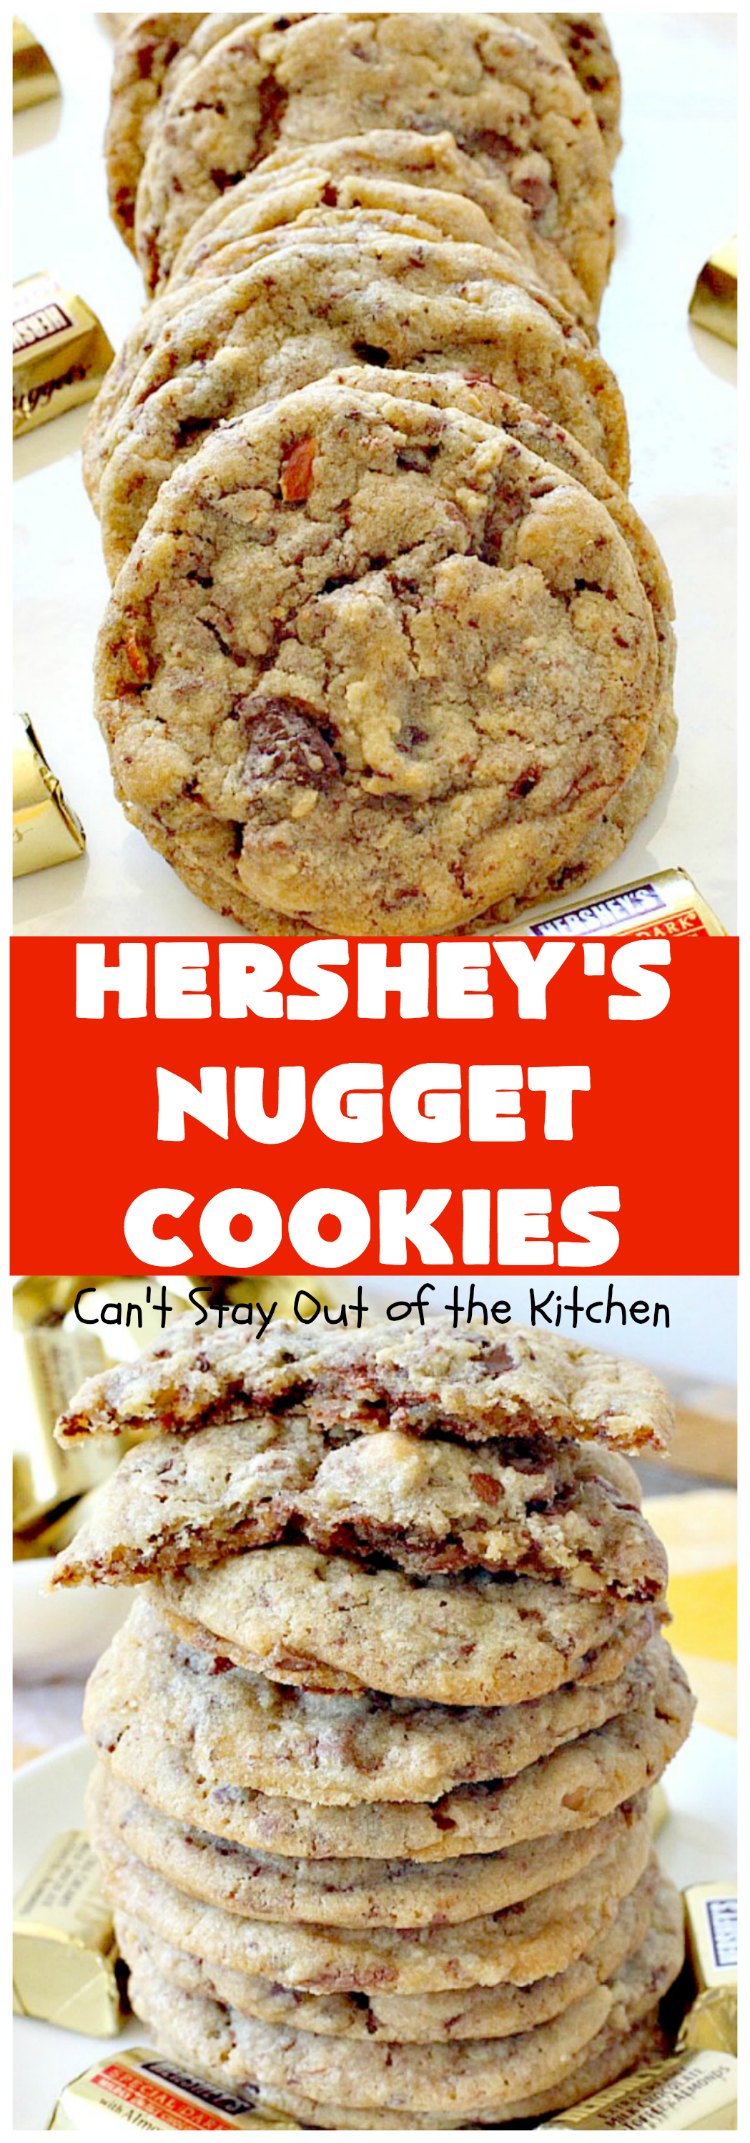 Hershey's Nugget Cookies | Can't Stay Out of the Kitchen